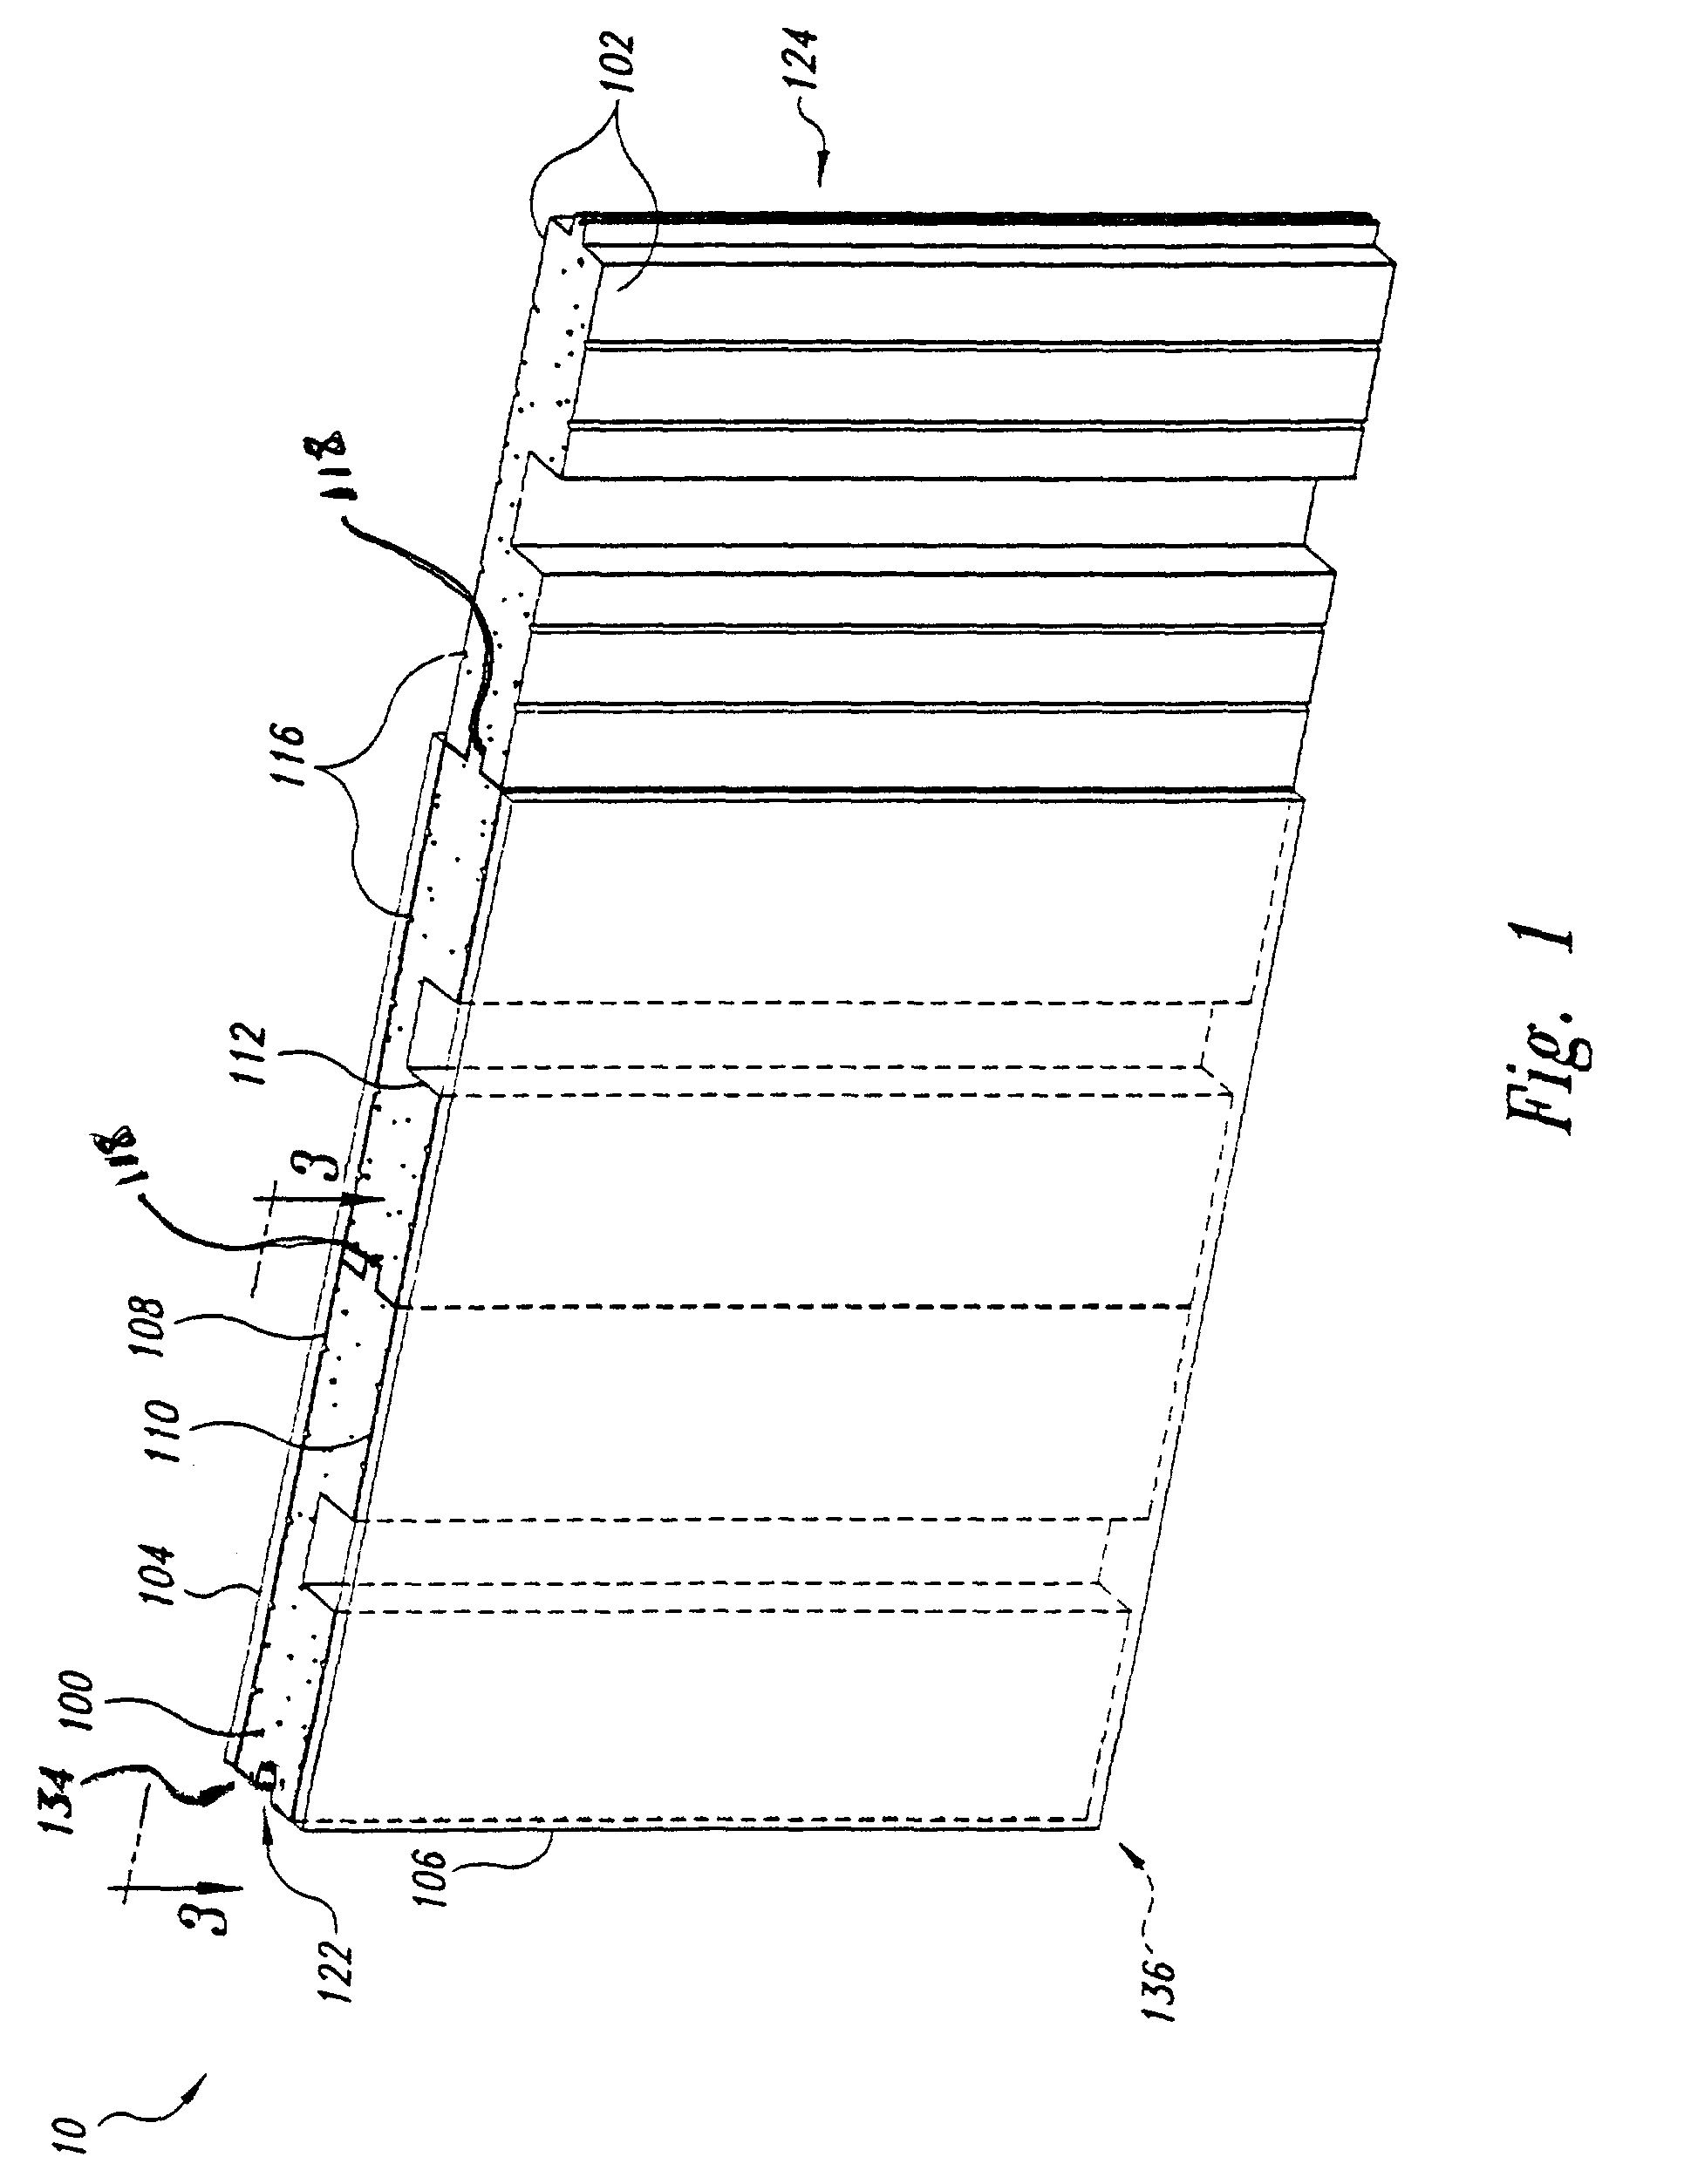 Insulated asymmetrical directional force resistant building panel with symmetrical joinery, integral shear resistance connector and thermal break